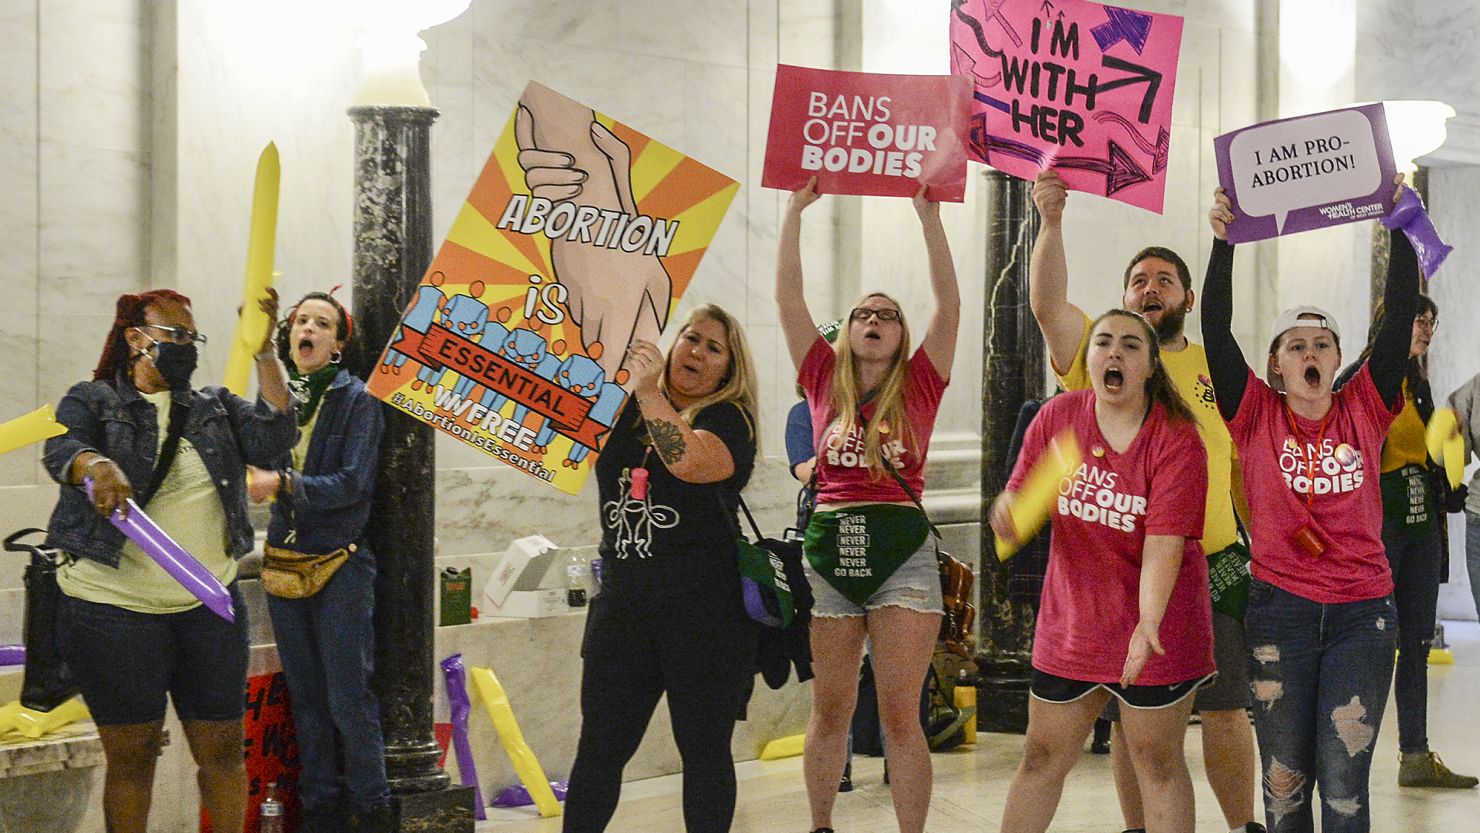 Abortion rights supporters demonstrate outside the Senate chamber at the West Virginia State Capitol on September 13, 2022, in Charleston.